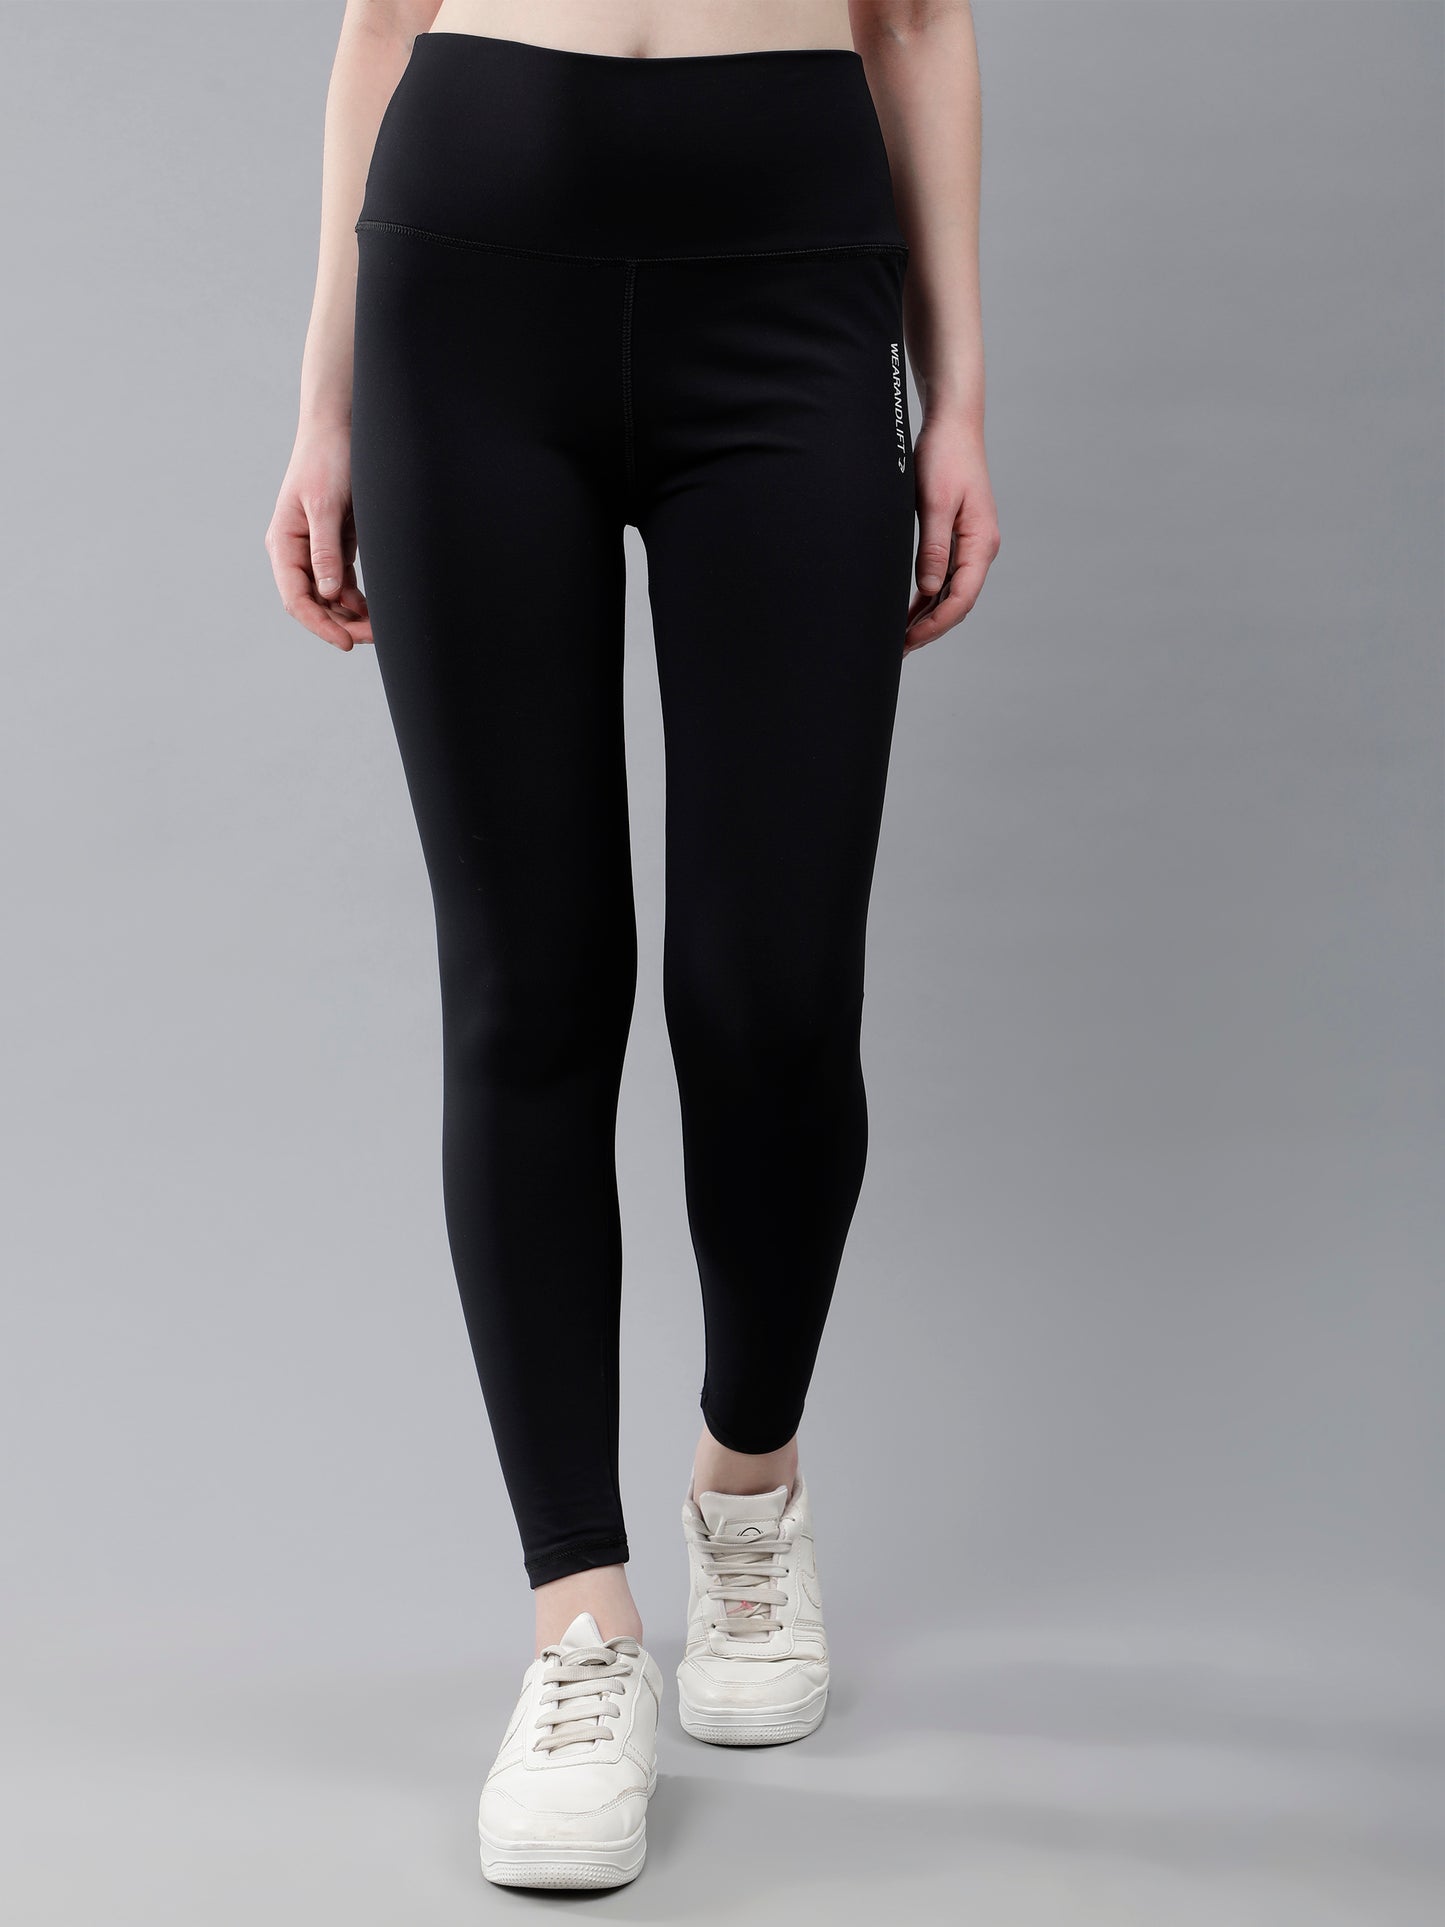 Black Workout Tights for Women